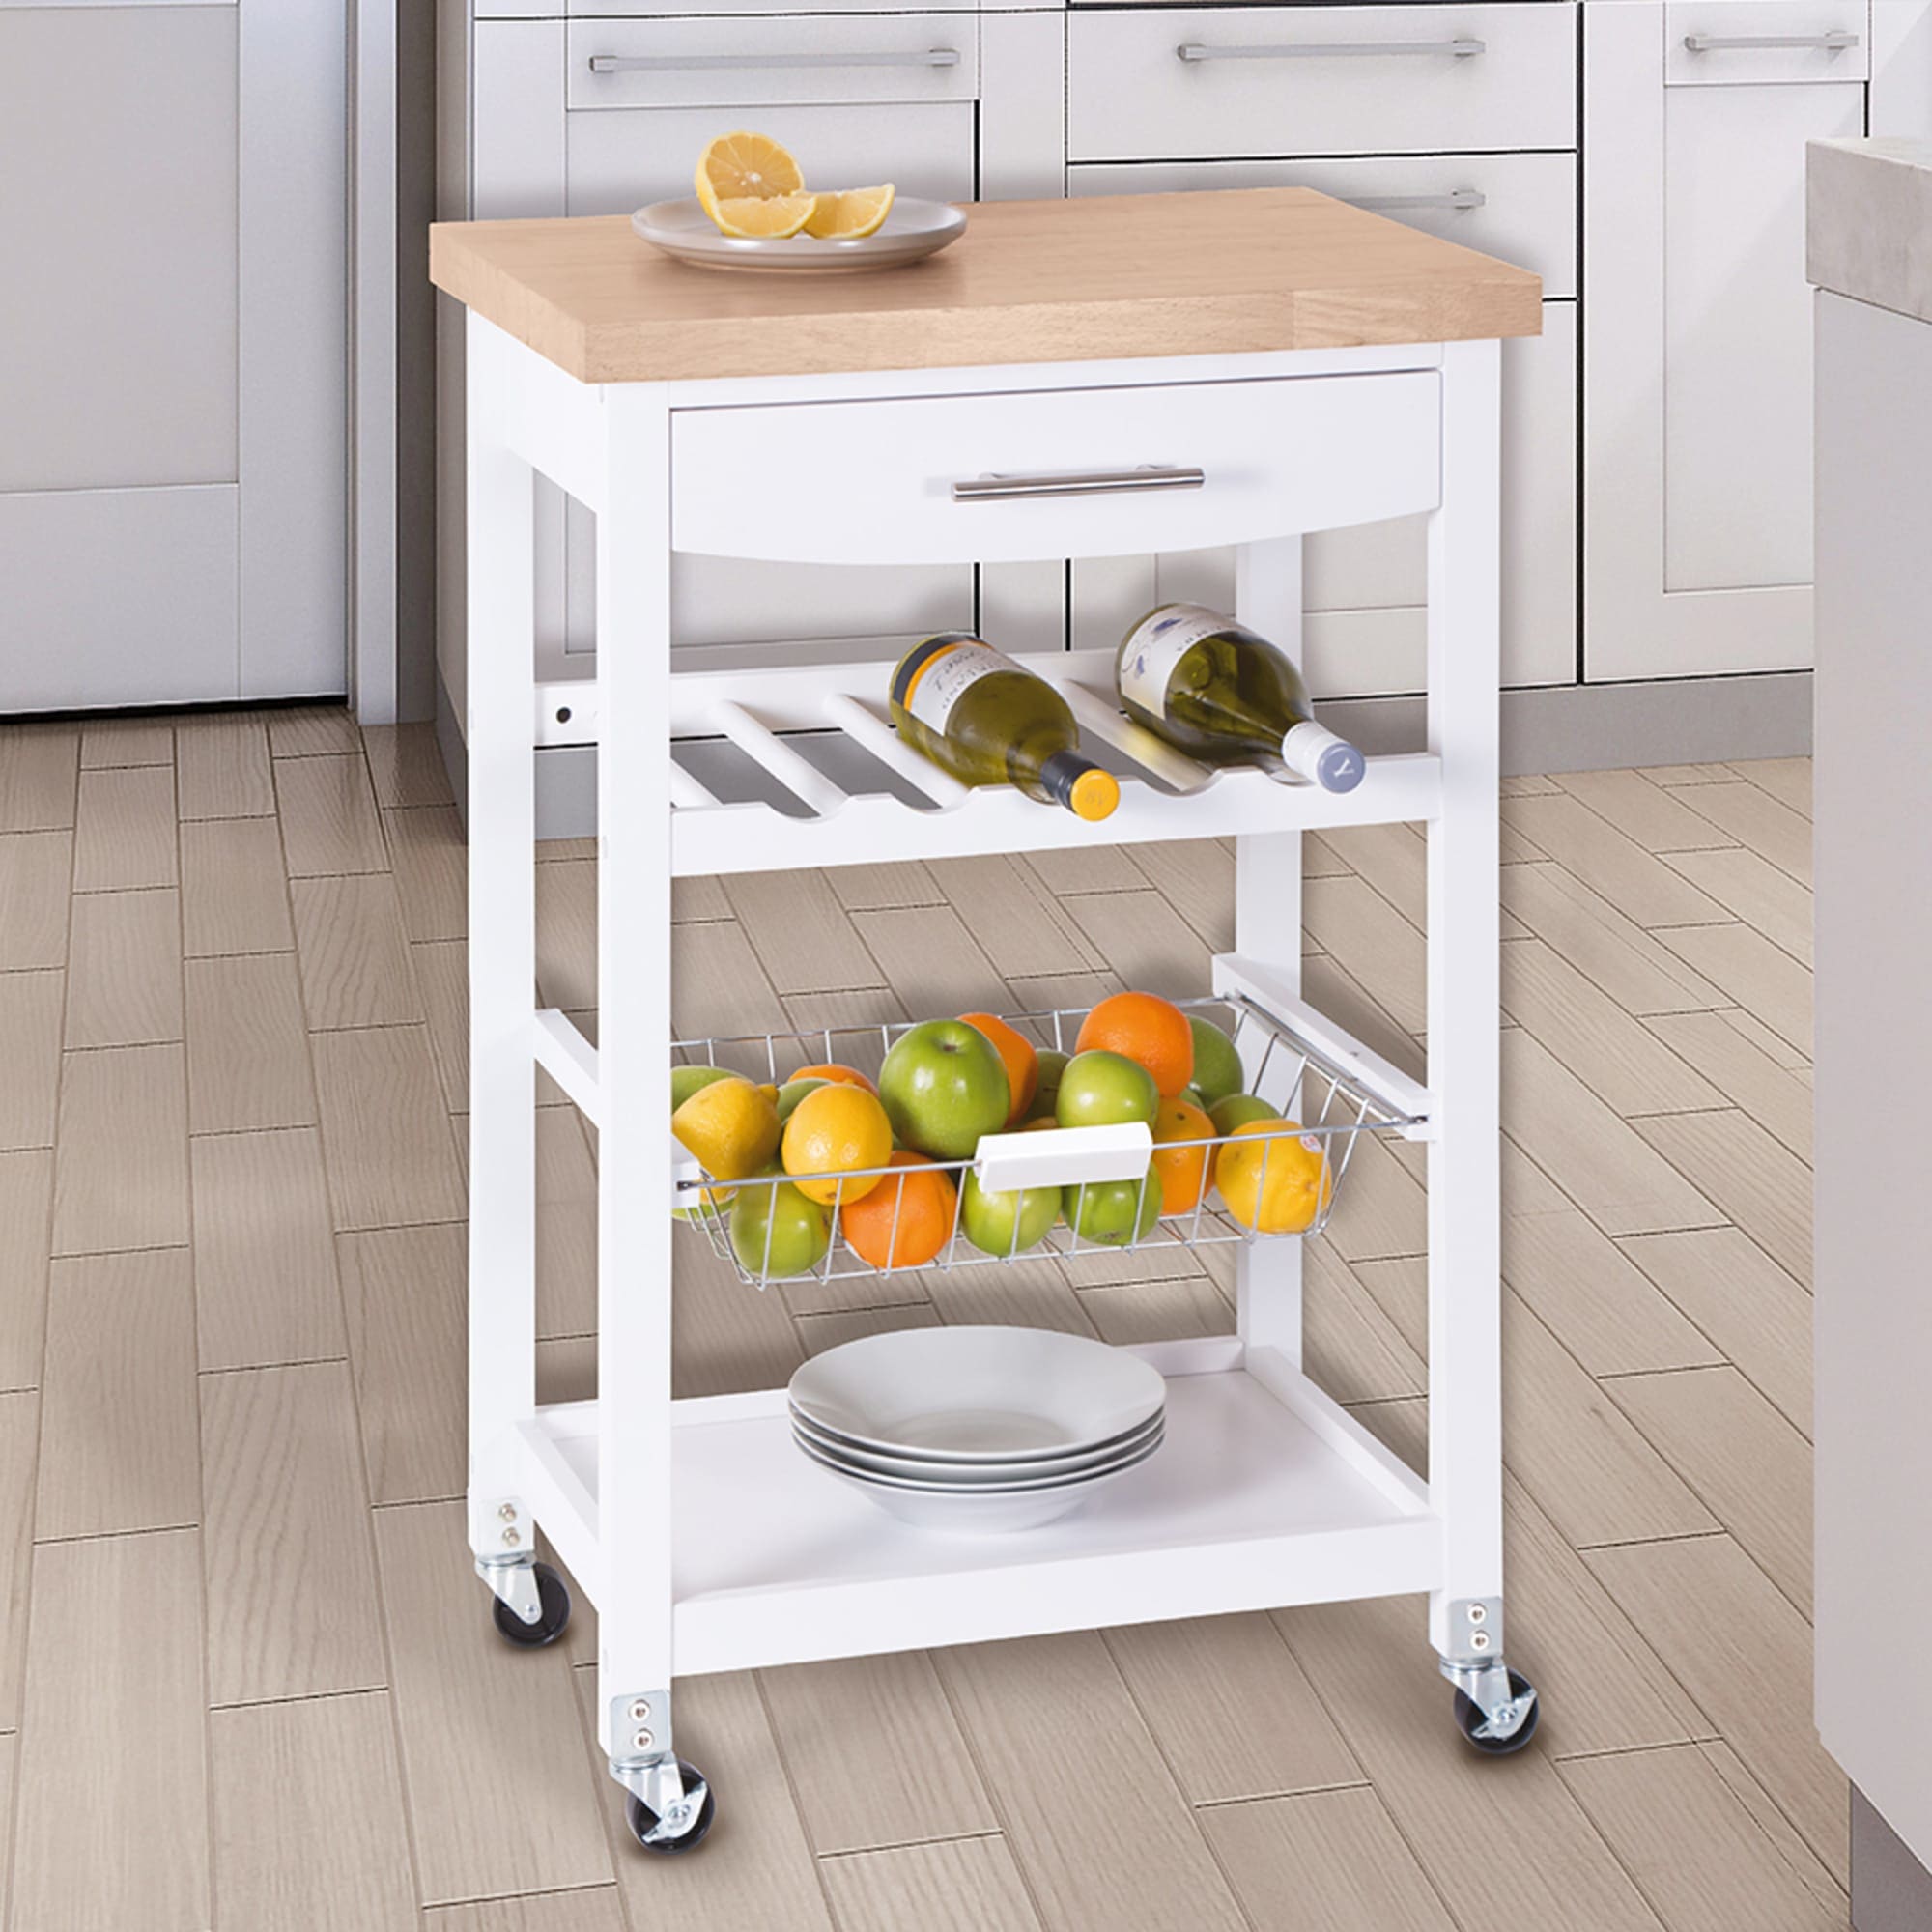 Home Basics 4 Tier Kitchen Trolley with Wood Top, White $100 EACH, CASE PACK OF 1